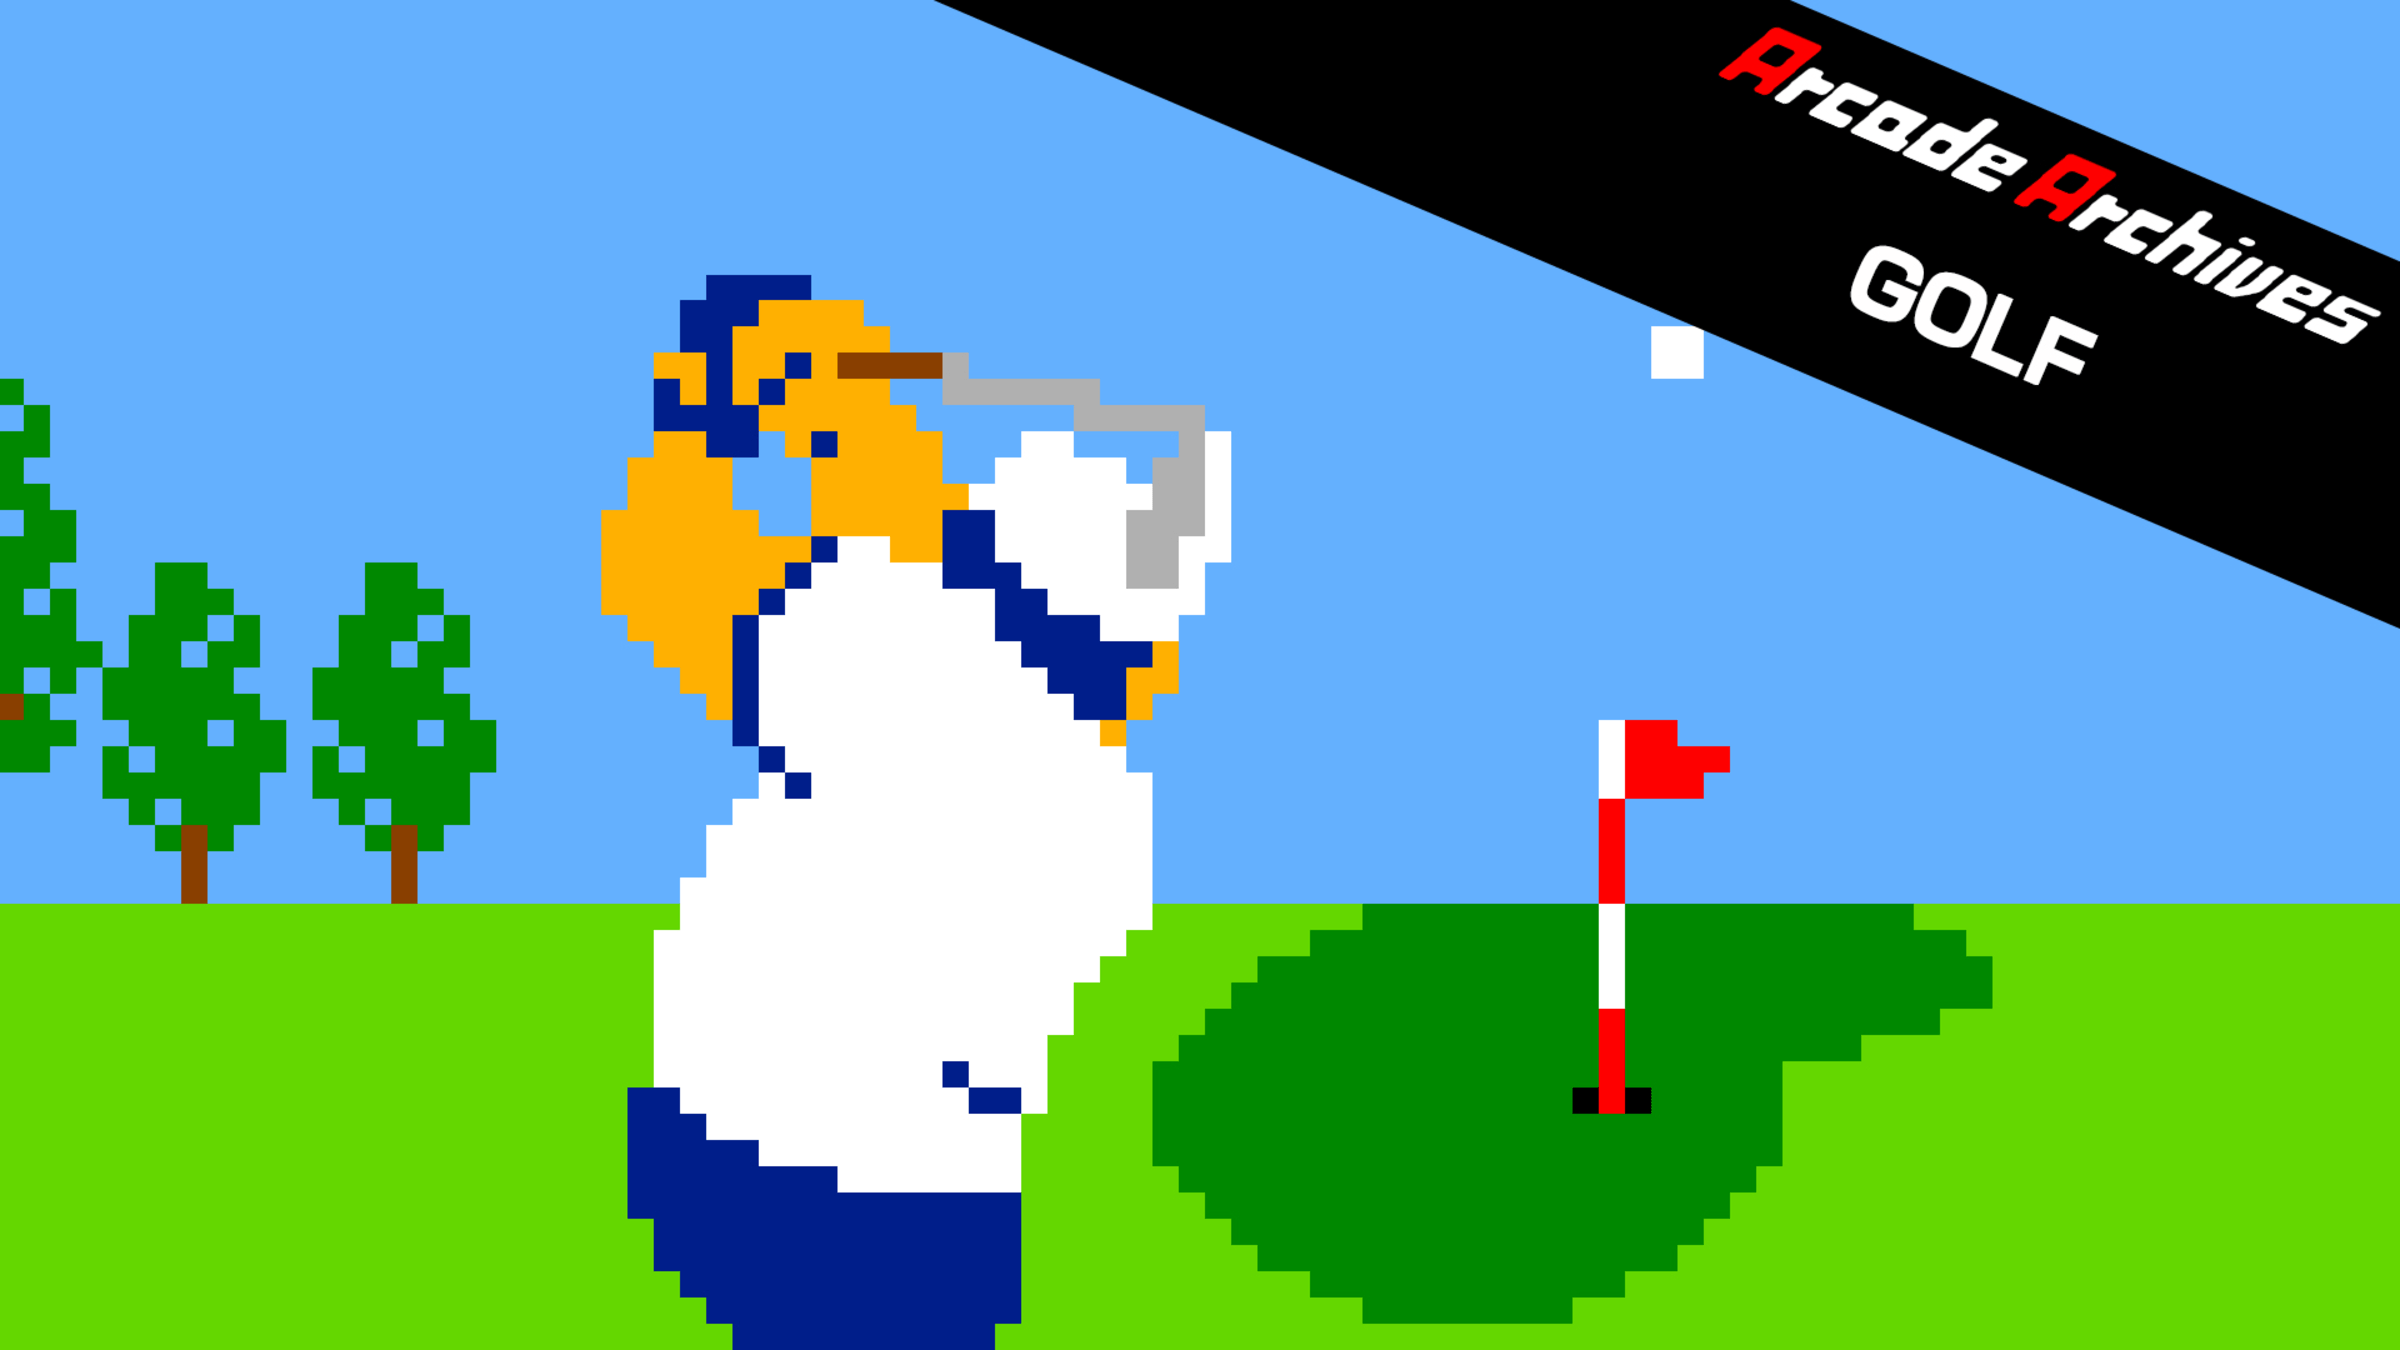 Golf: Hole in One for Nintendo Switch - Nintendo Official Site